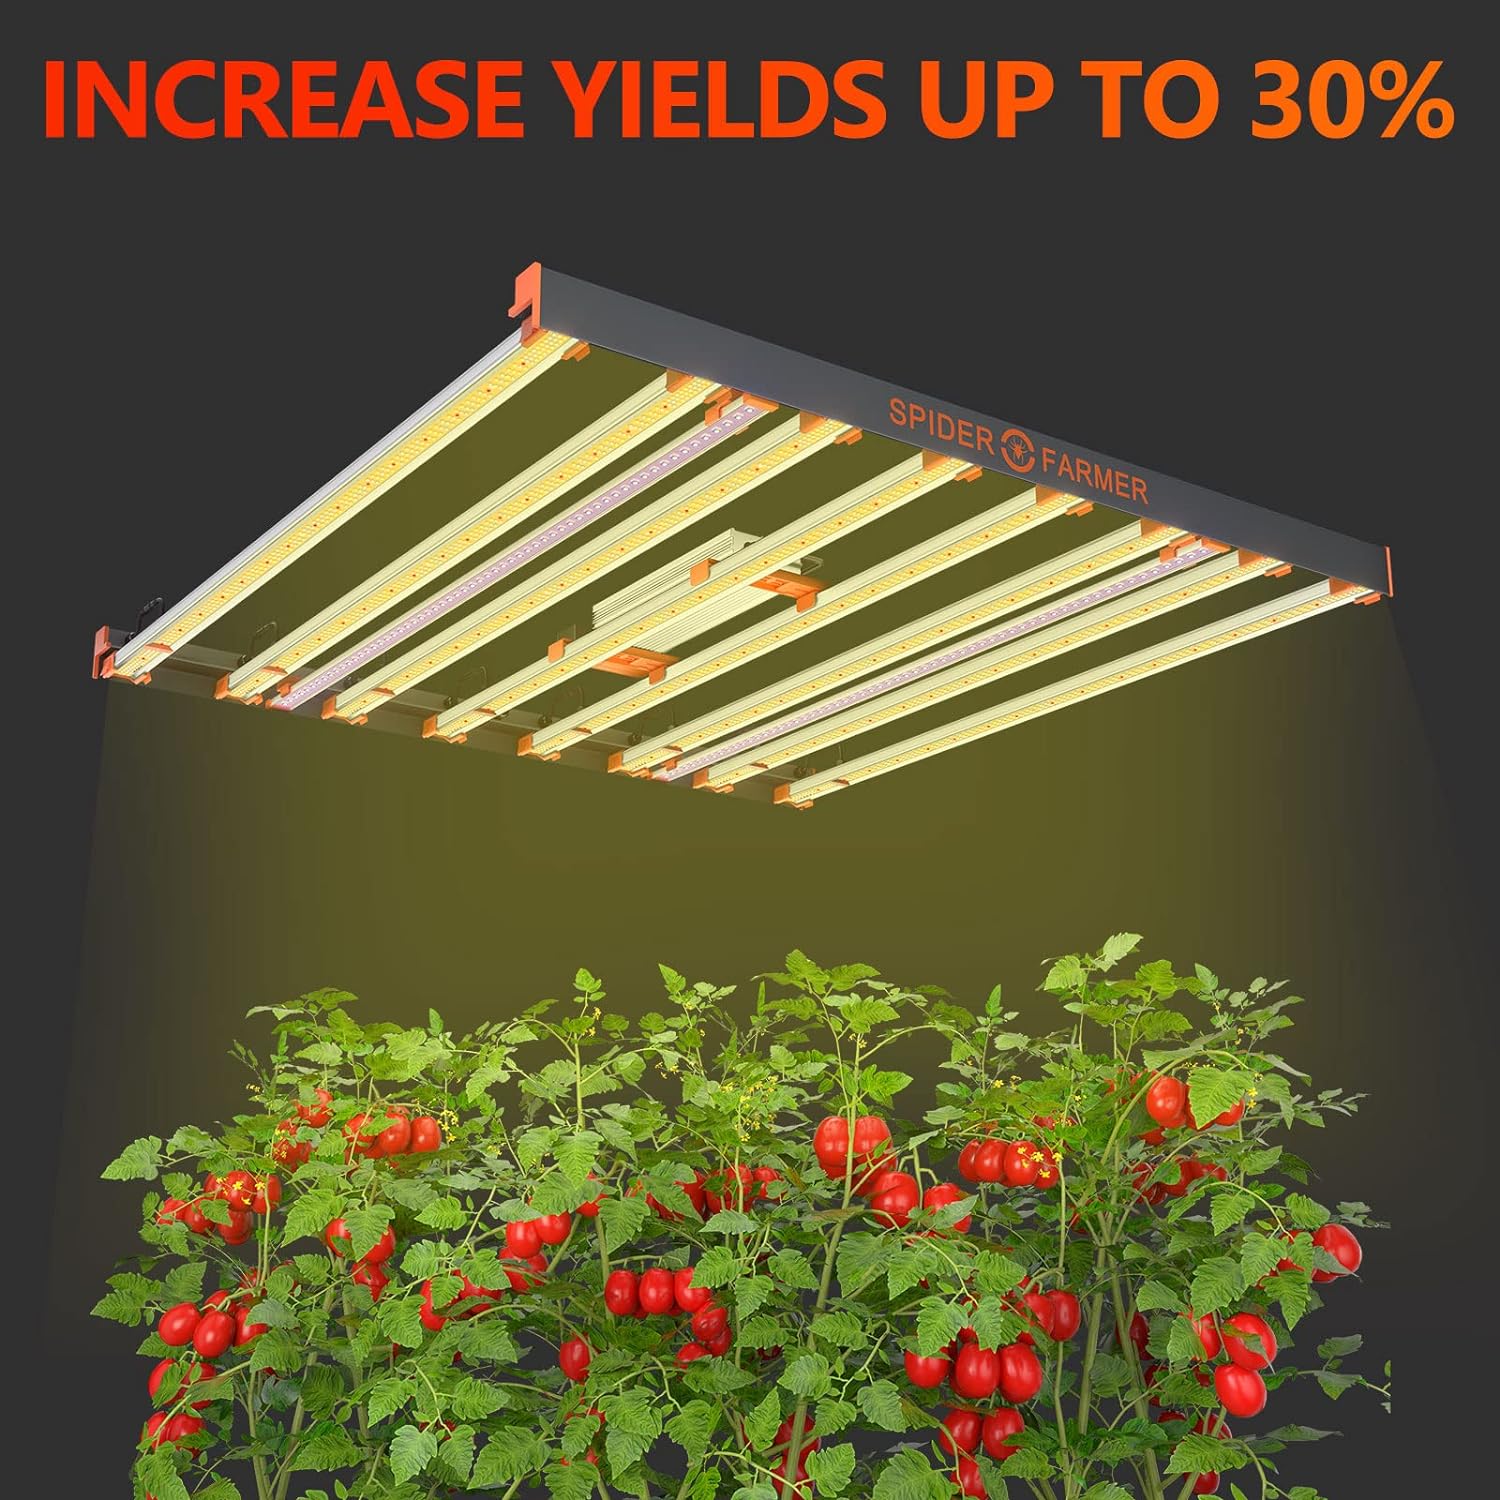 Spider Farmer UV30 UV Supplemental LED Grow Light 30W 365-420nm Compatible with SE7000, SE1000W, G8600, G1000W Commercial Grade Grow Lights UVA Supplemental Bar for 2X4, 4X4, 5X5 Grow Tents